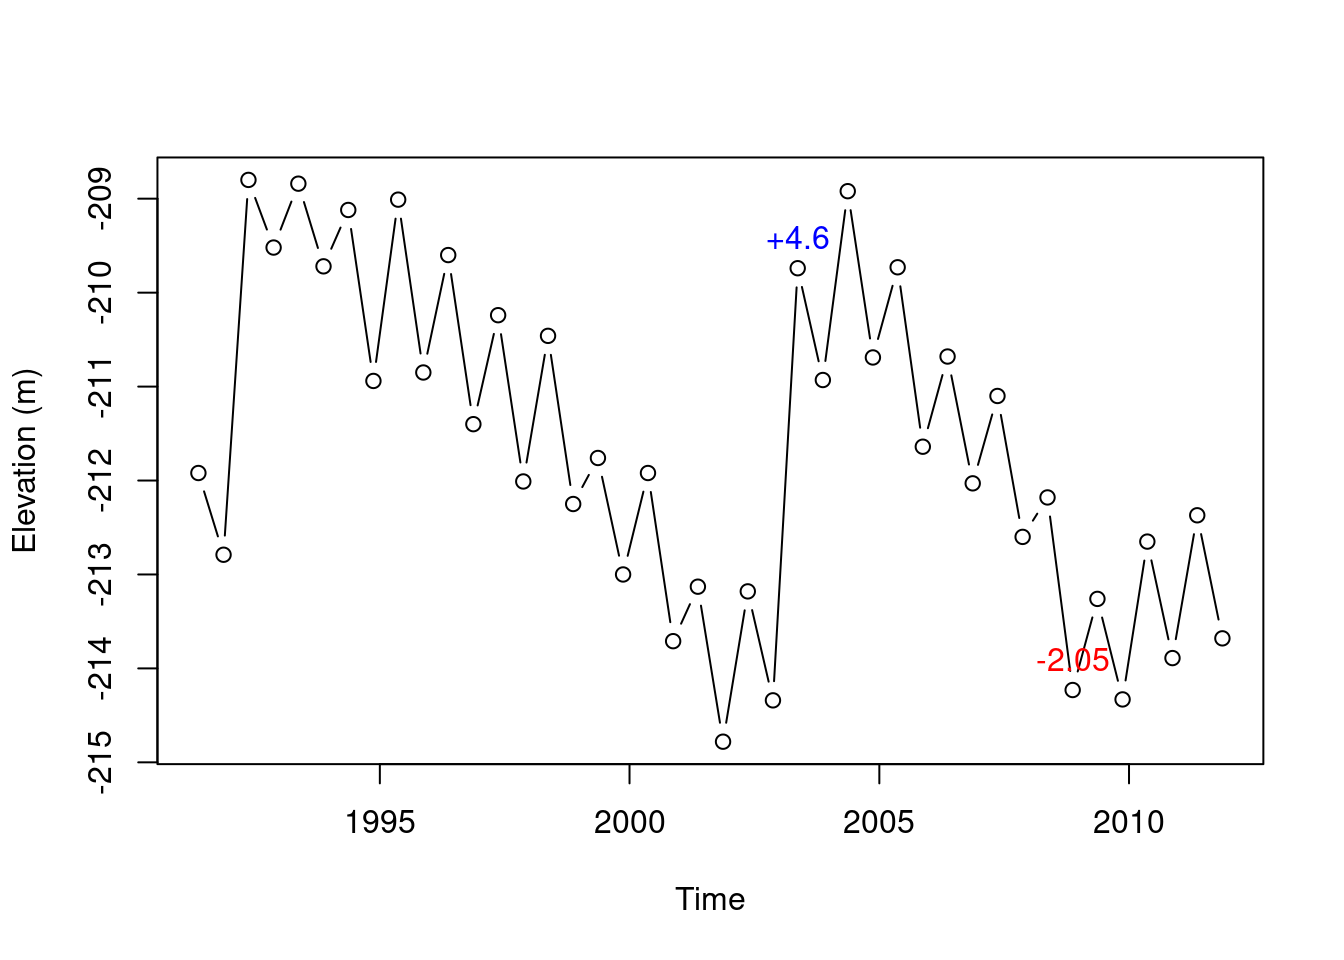 Times of biggest increase (2003) and decrease (2008) in the Kinneret water level time series